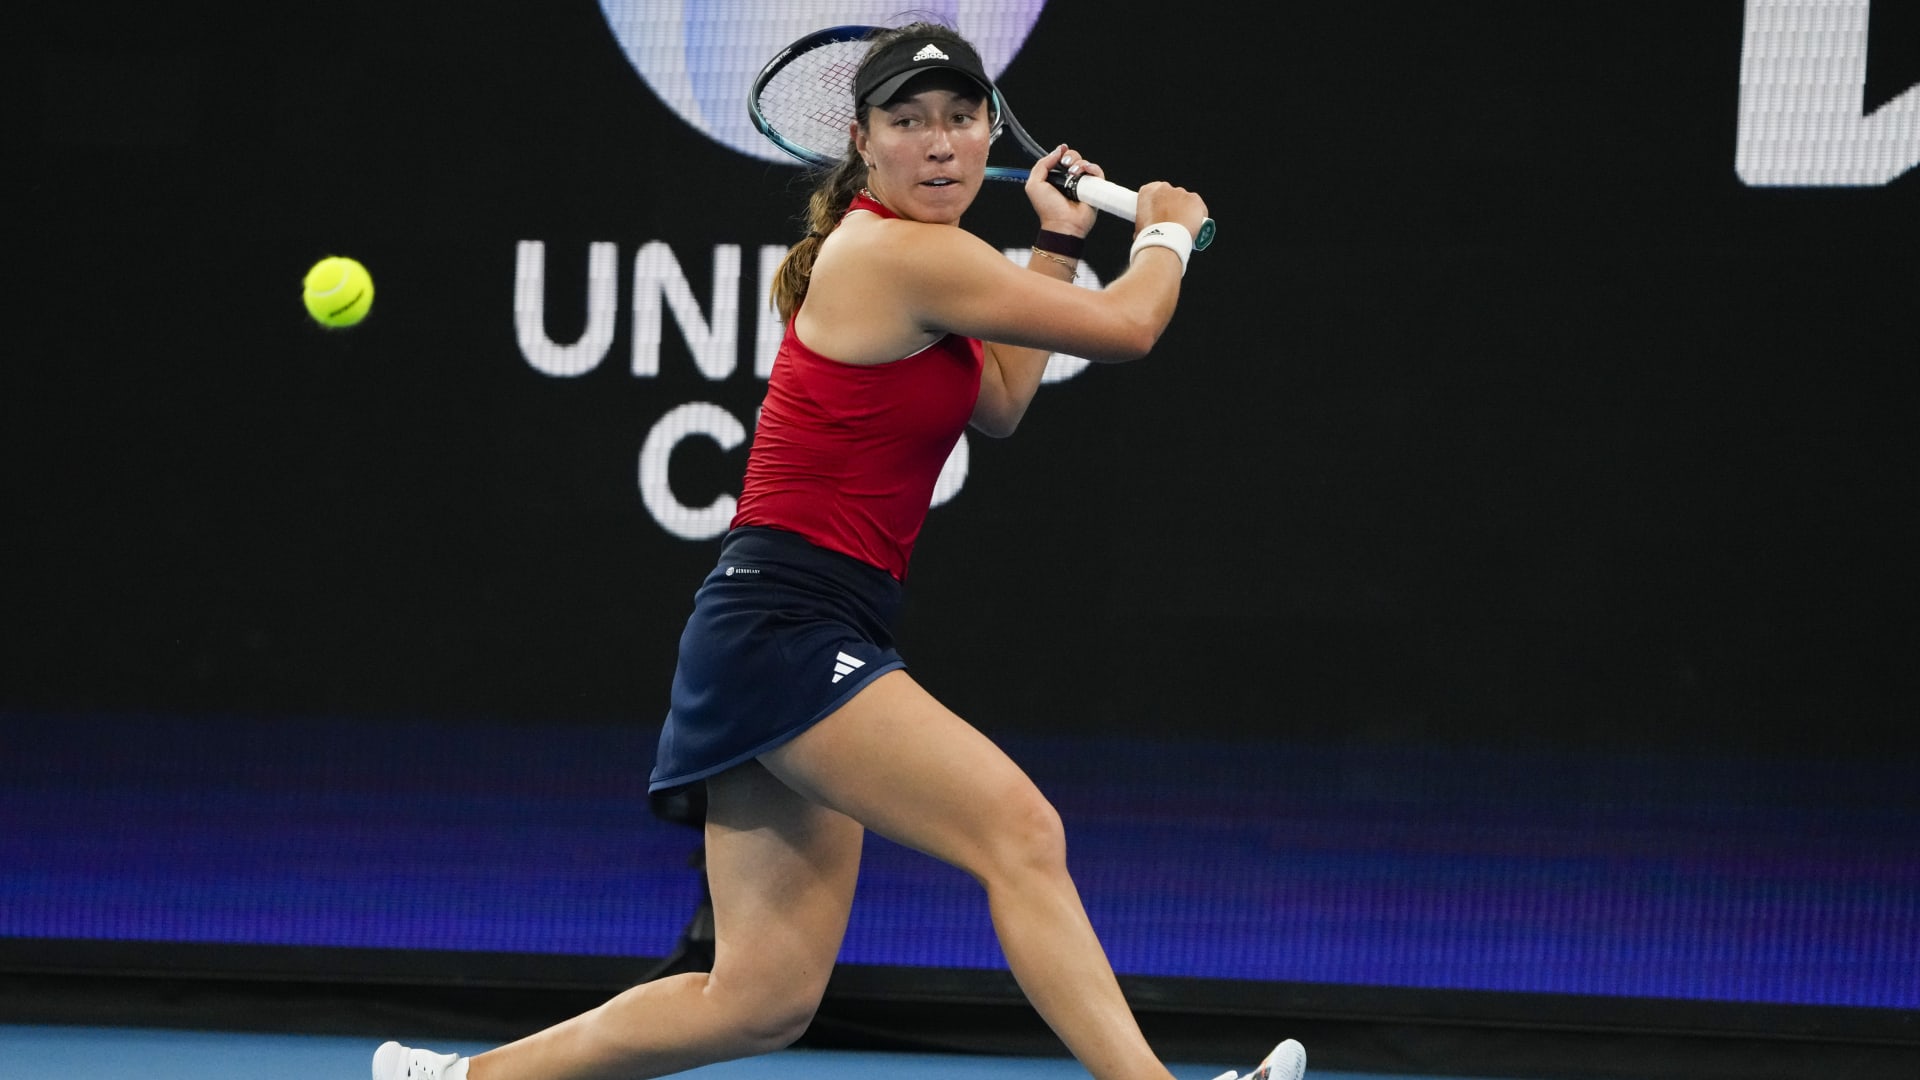 United Cup recap US, Greece, Italy clinch wins with performances from Sakkari, Tiafoe and Berrettini